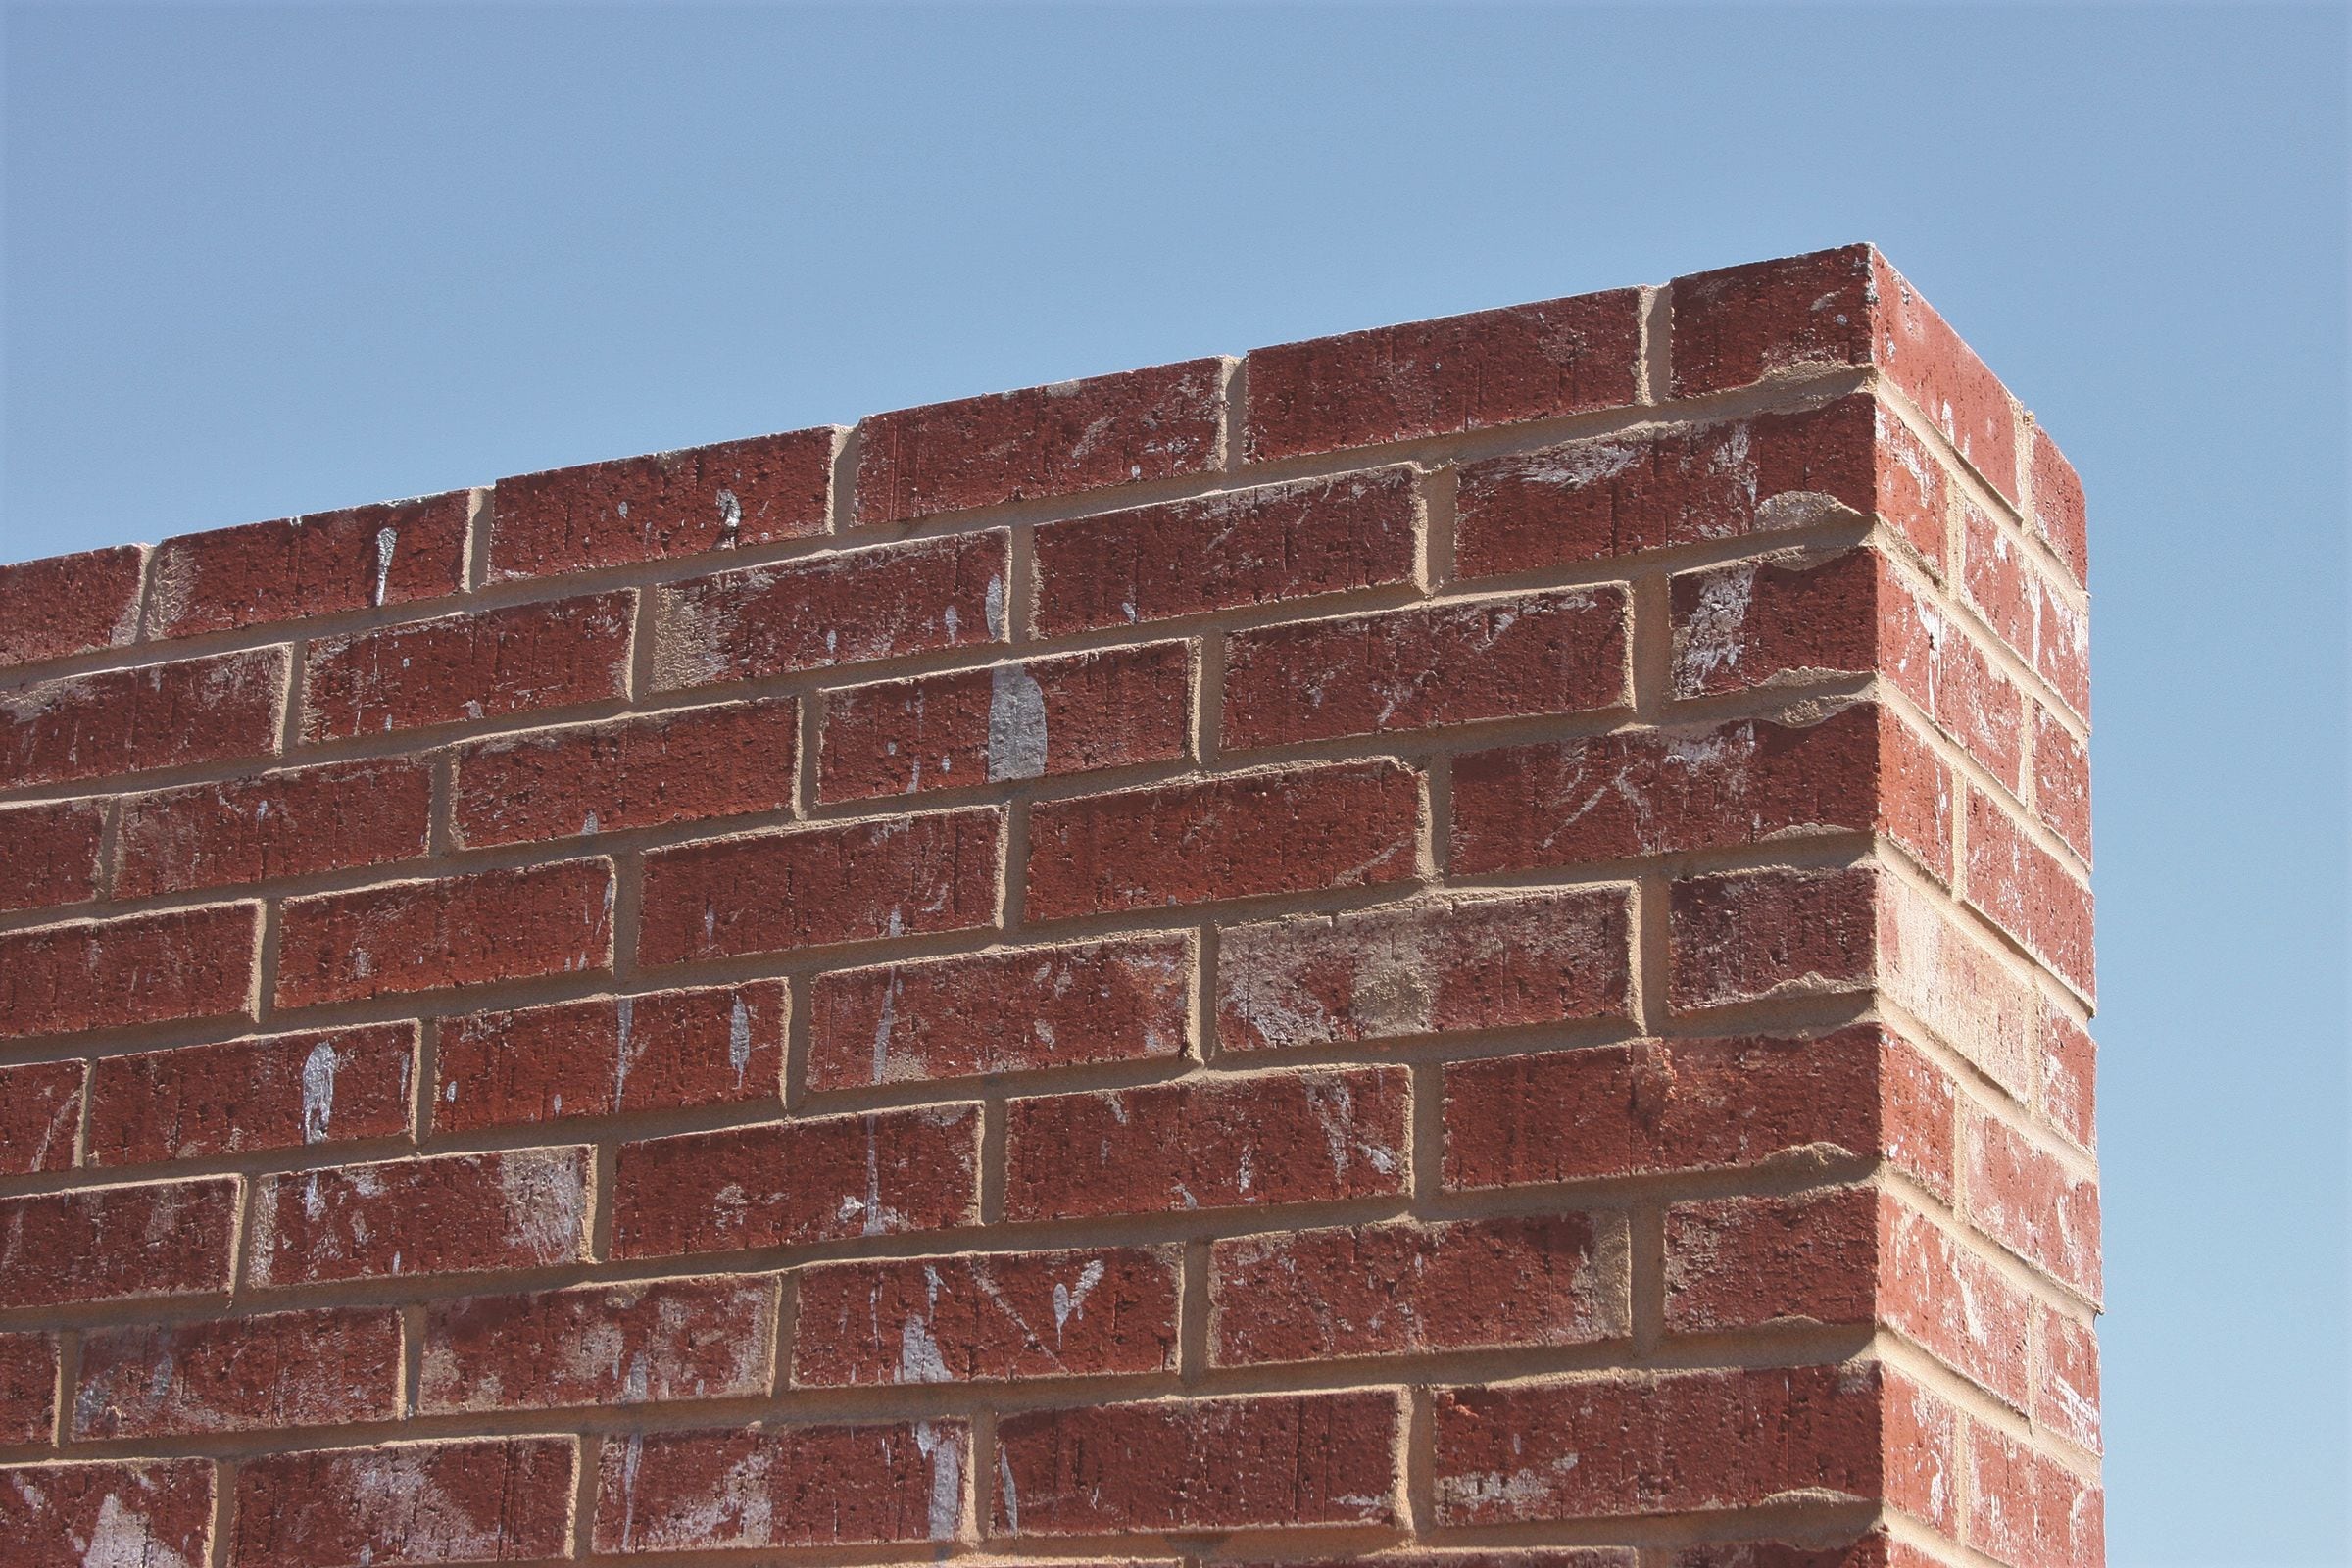 Red clay brick on sale for up to $1,000 on 